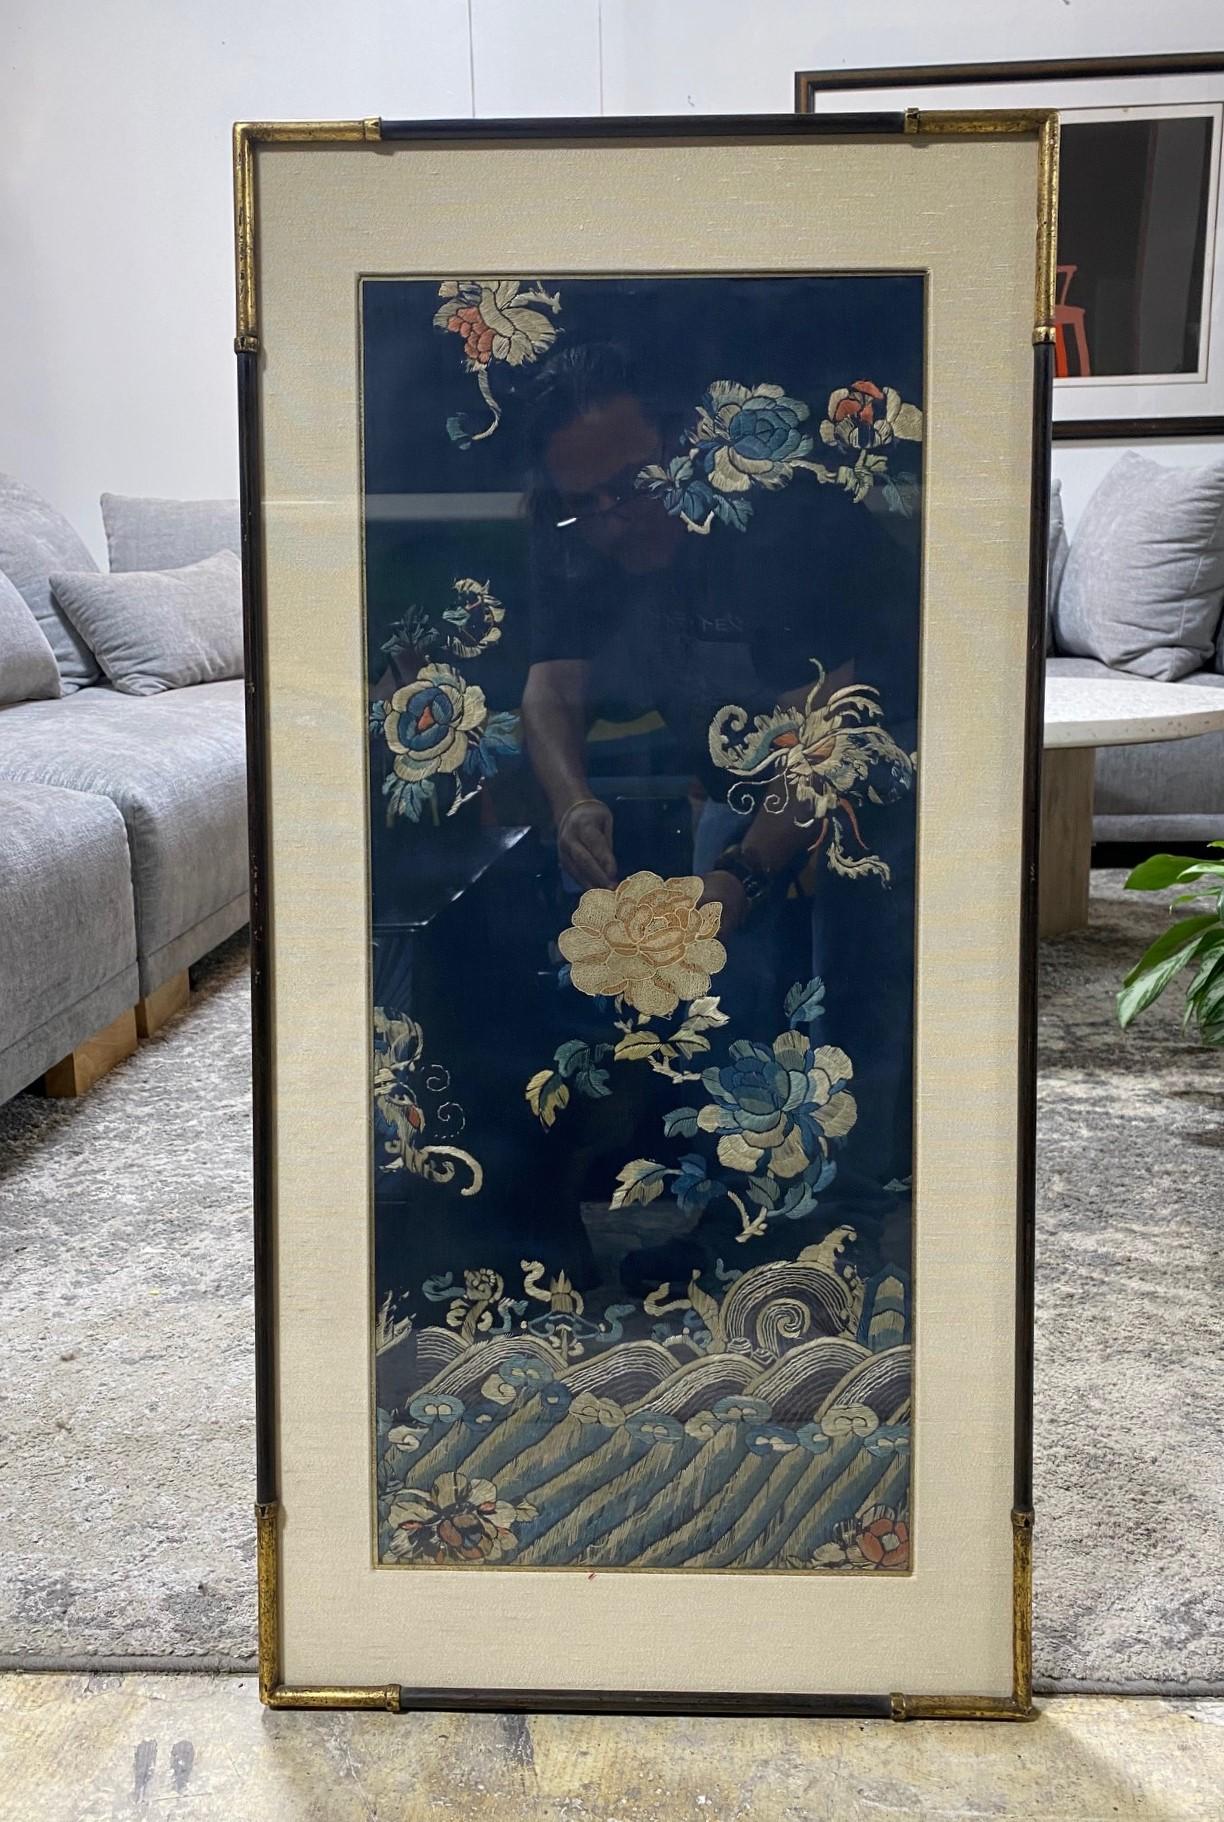 A beautiful and wonderfully designed/composed Japanese textile panel with embroidery floral natural landscape/flower decoration.  The work is presented in a gilt wood frame with a silk mat and gold leaf corners.  The ultra-fine needlework is quite